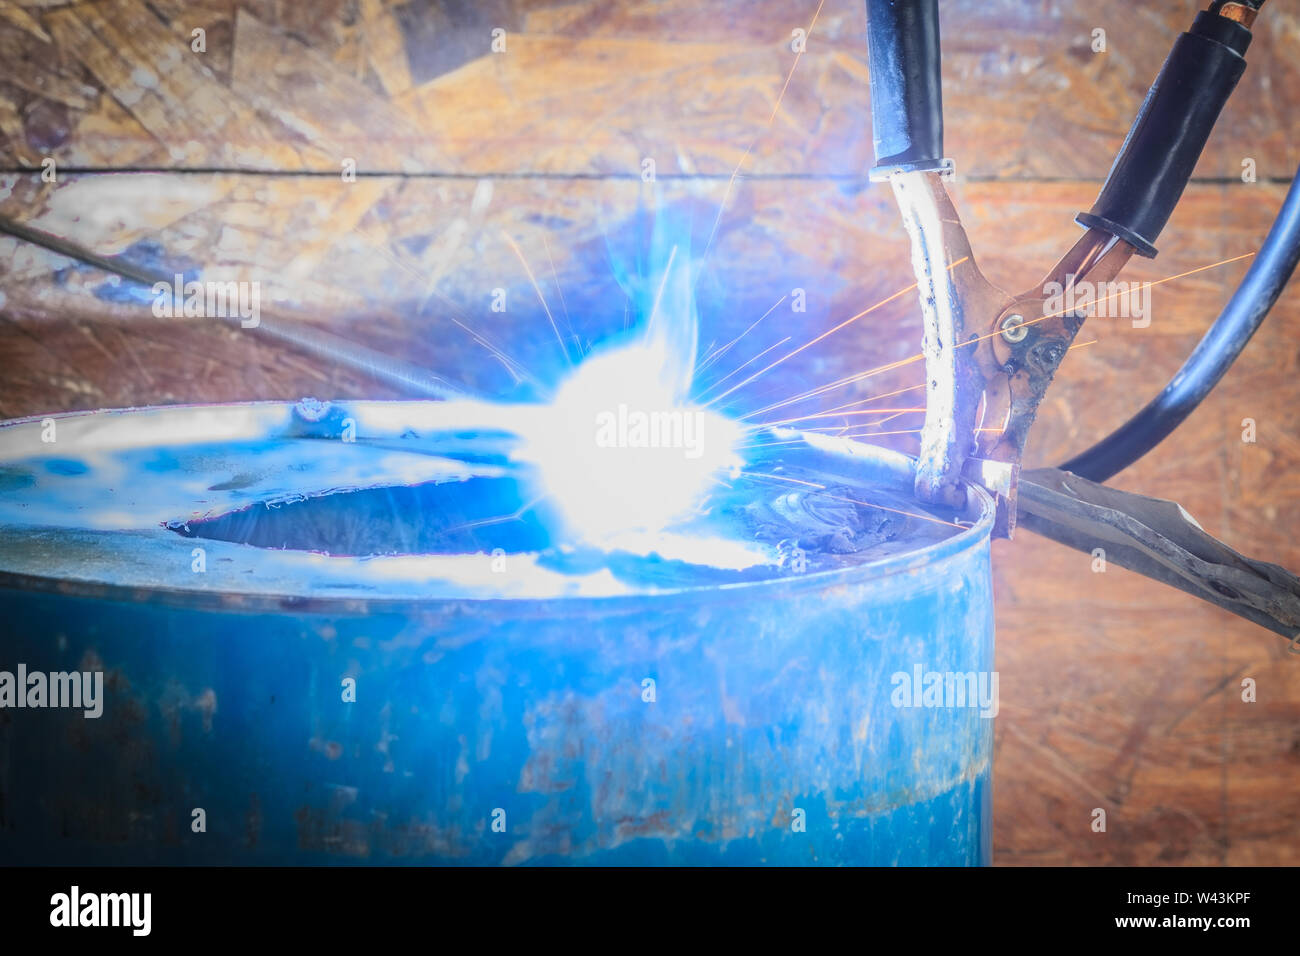 Spark light with welding Process with blue tube metal and bright sparks in steel Stock Photo